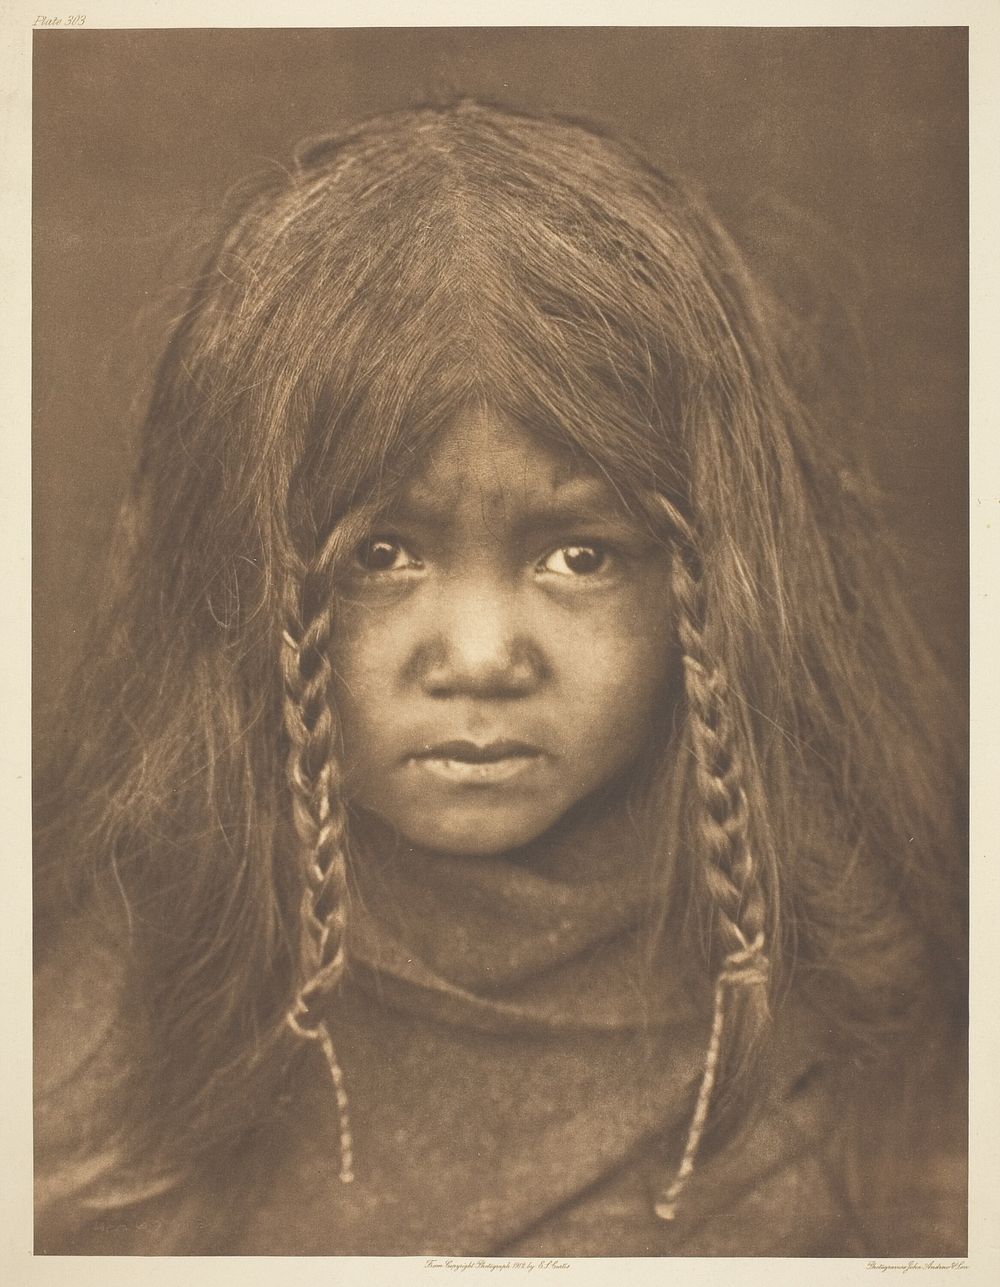 Quilcene Boy by Edward S. Curtis